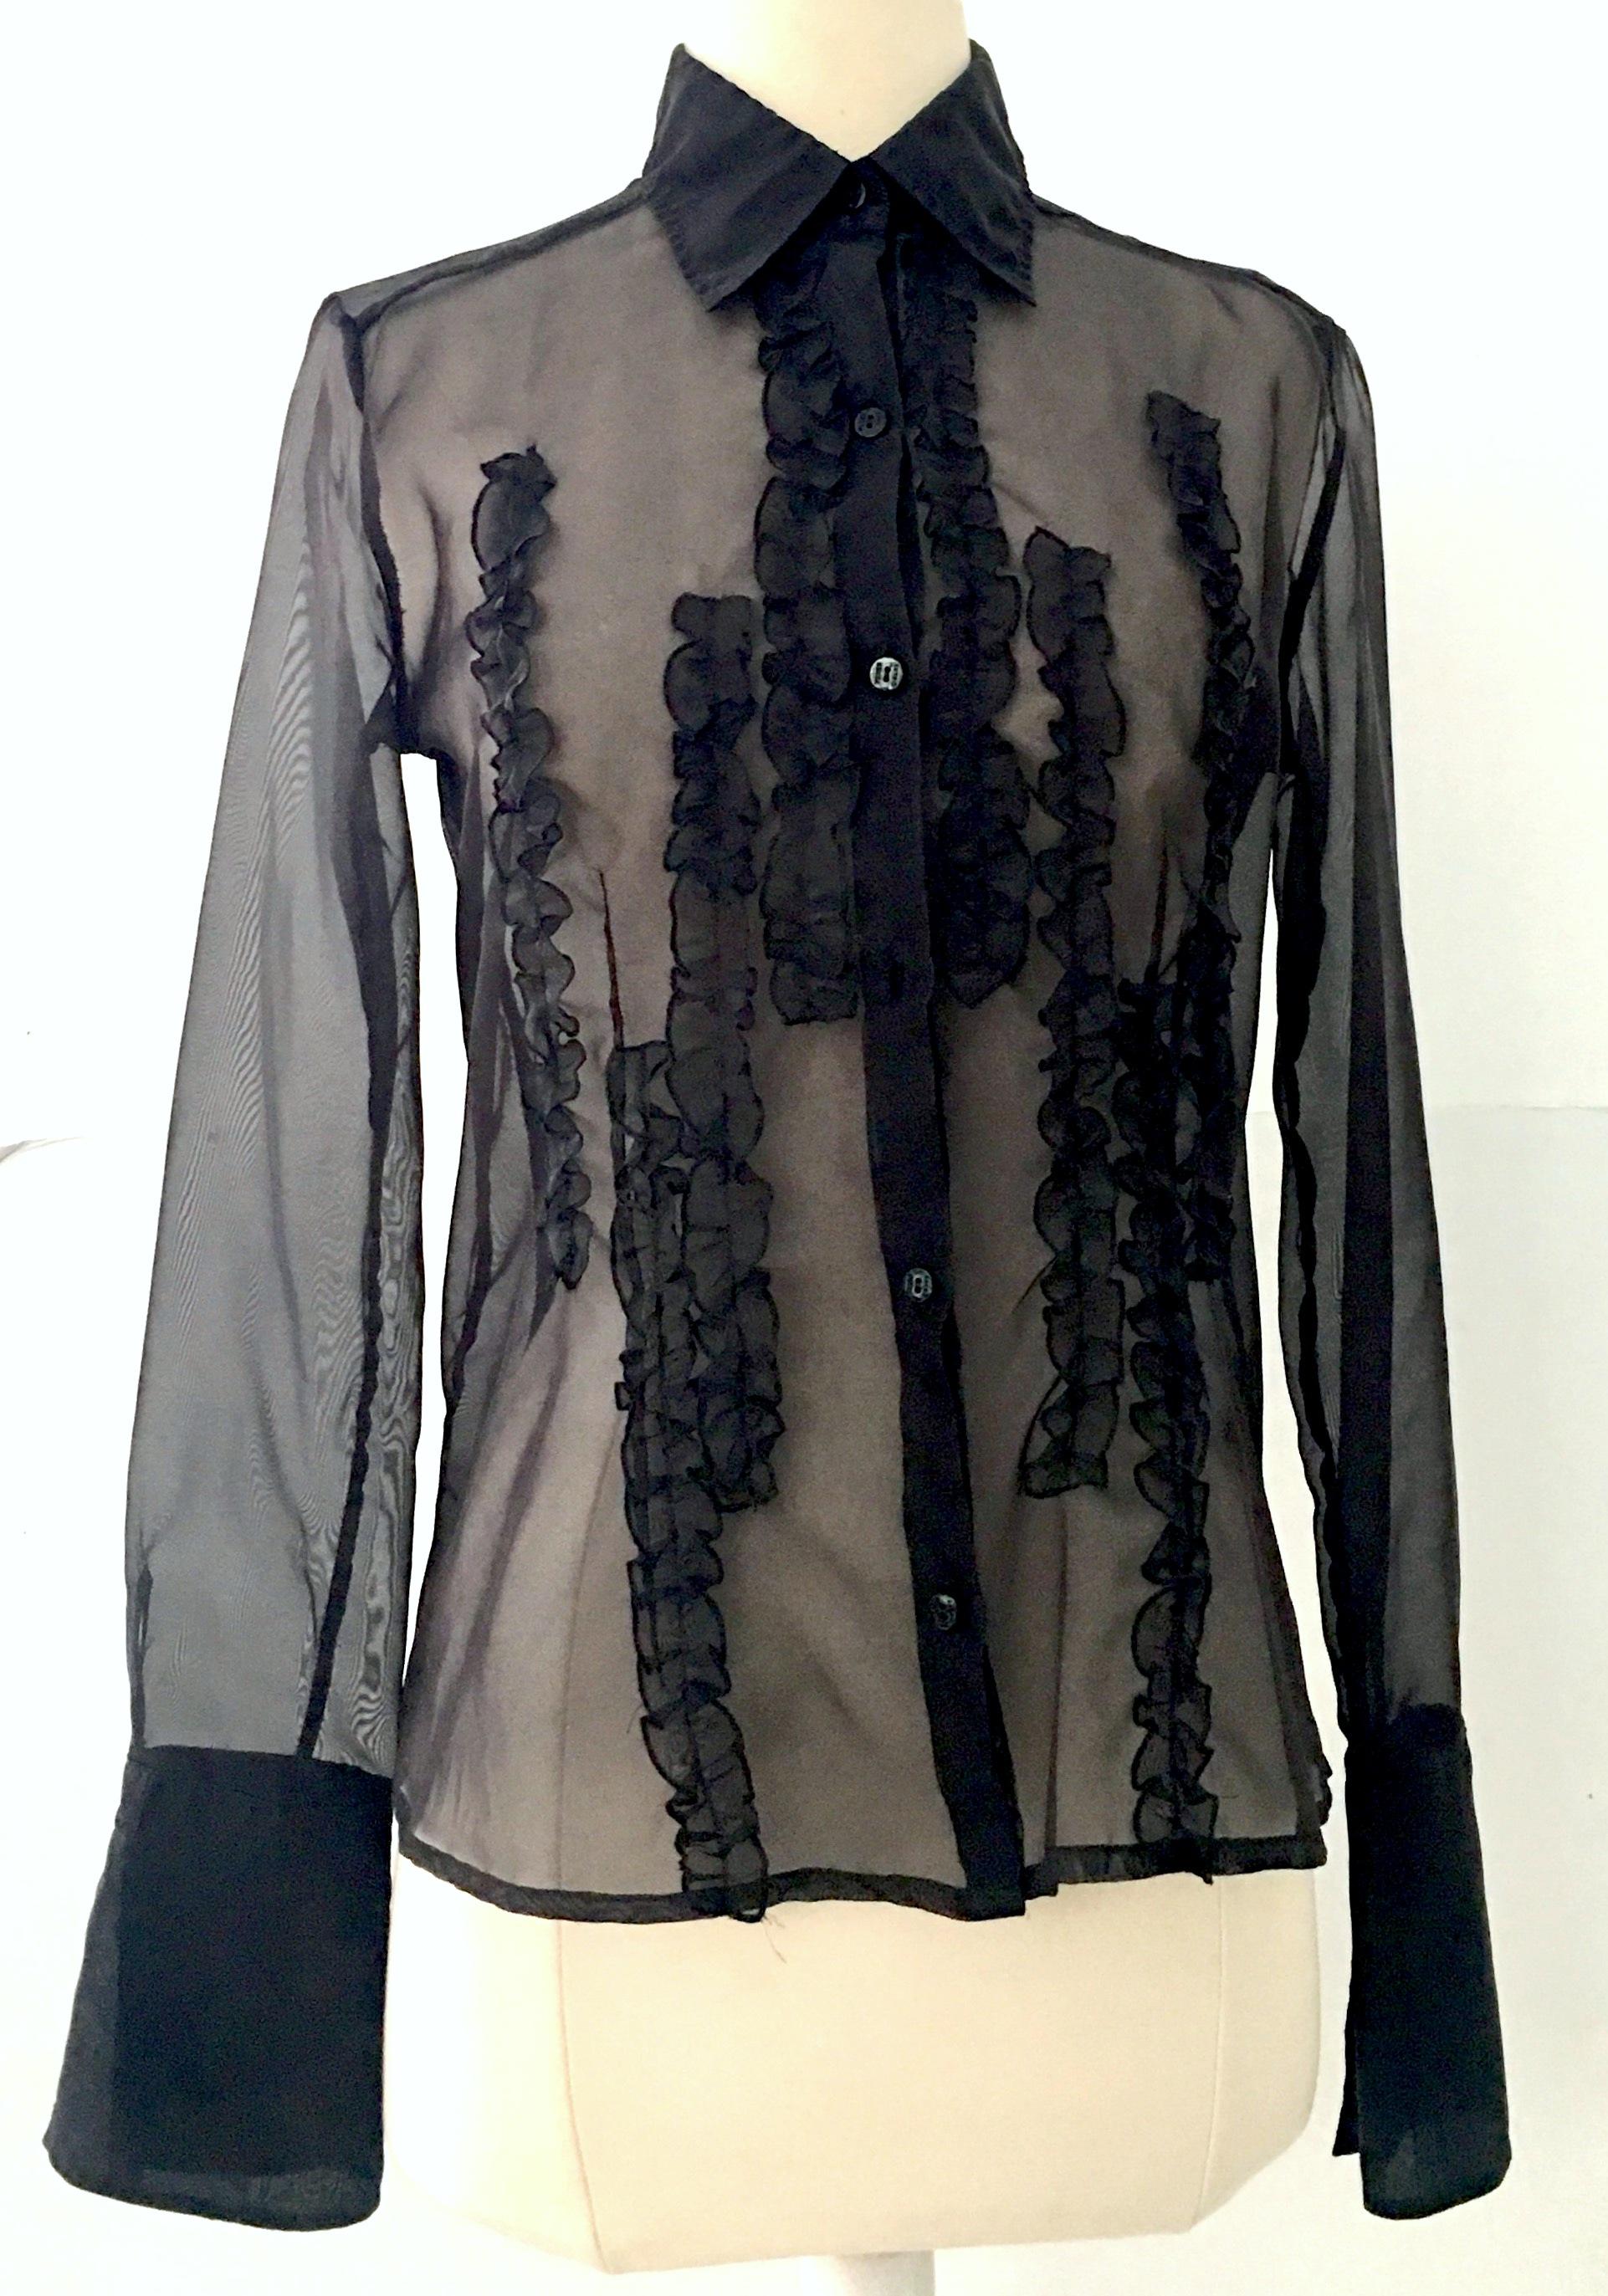 Classic Gianfranco Ferre black silk chiffon fitted ruffle front button up long sleeve blouse. Features Ginfranco Ferre logo buttons and french split sleeves.
The Gianfranco Ferre Jeans black and metallic gold label appears on the exterior side seam